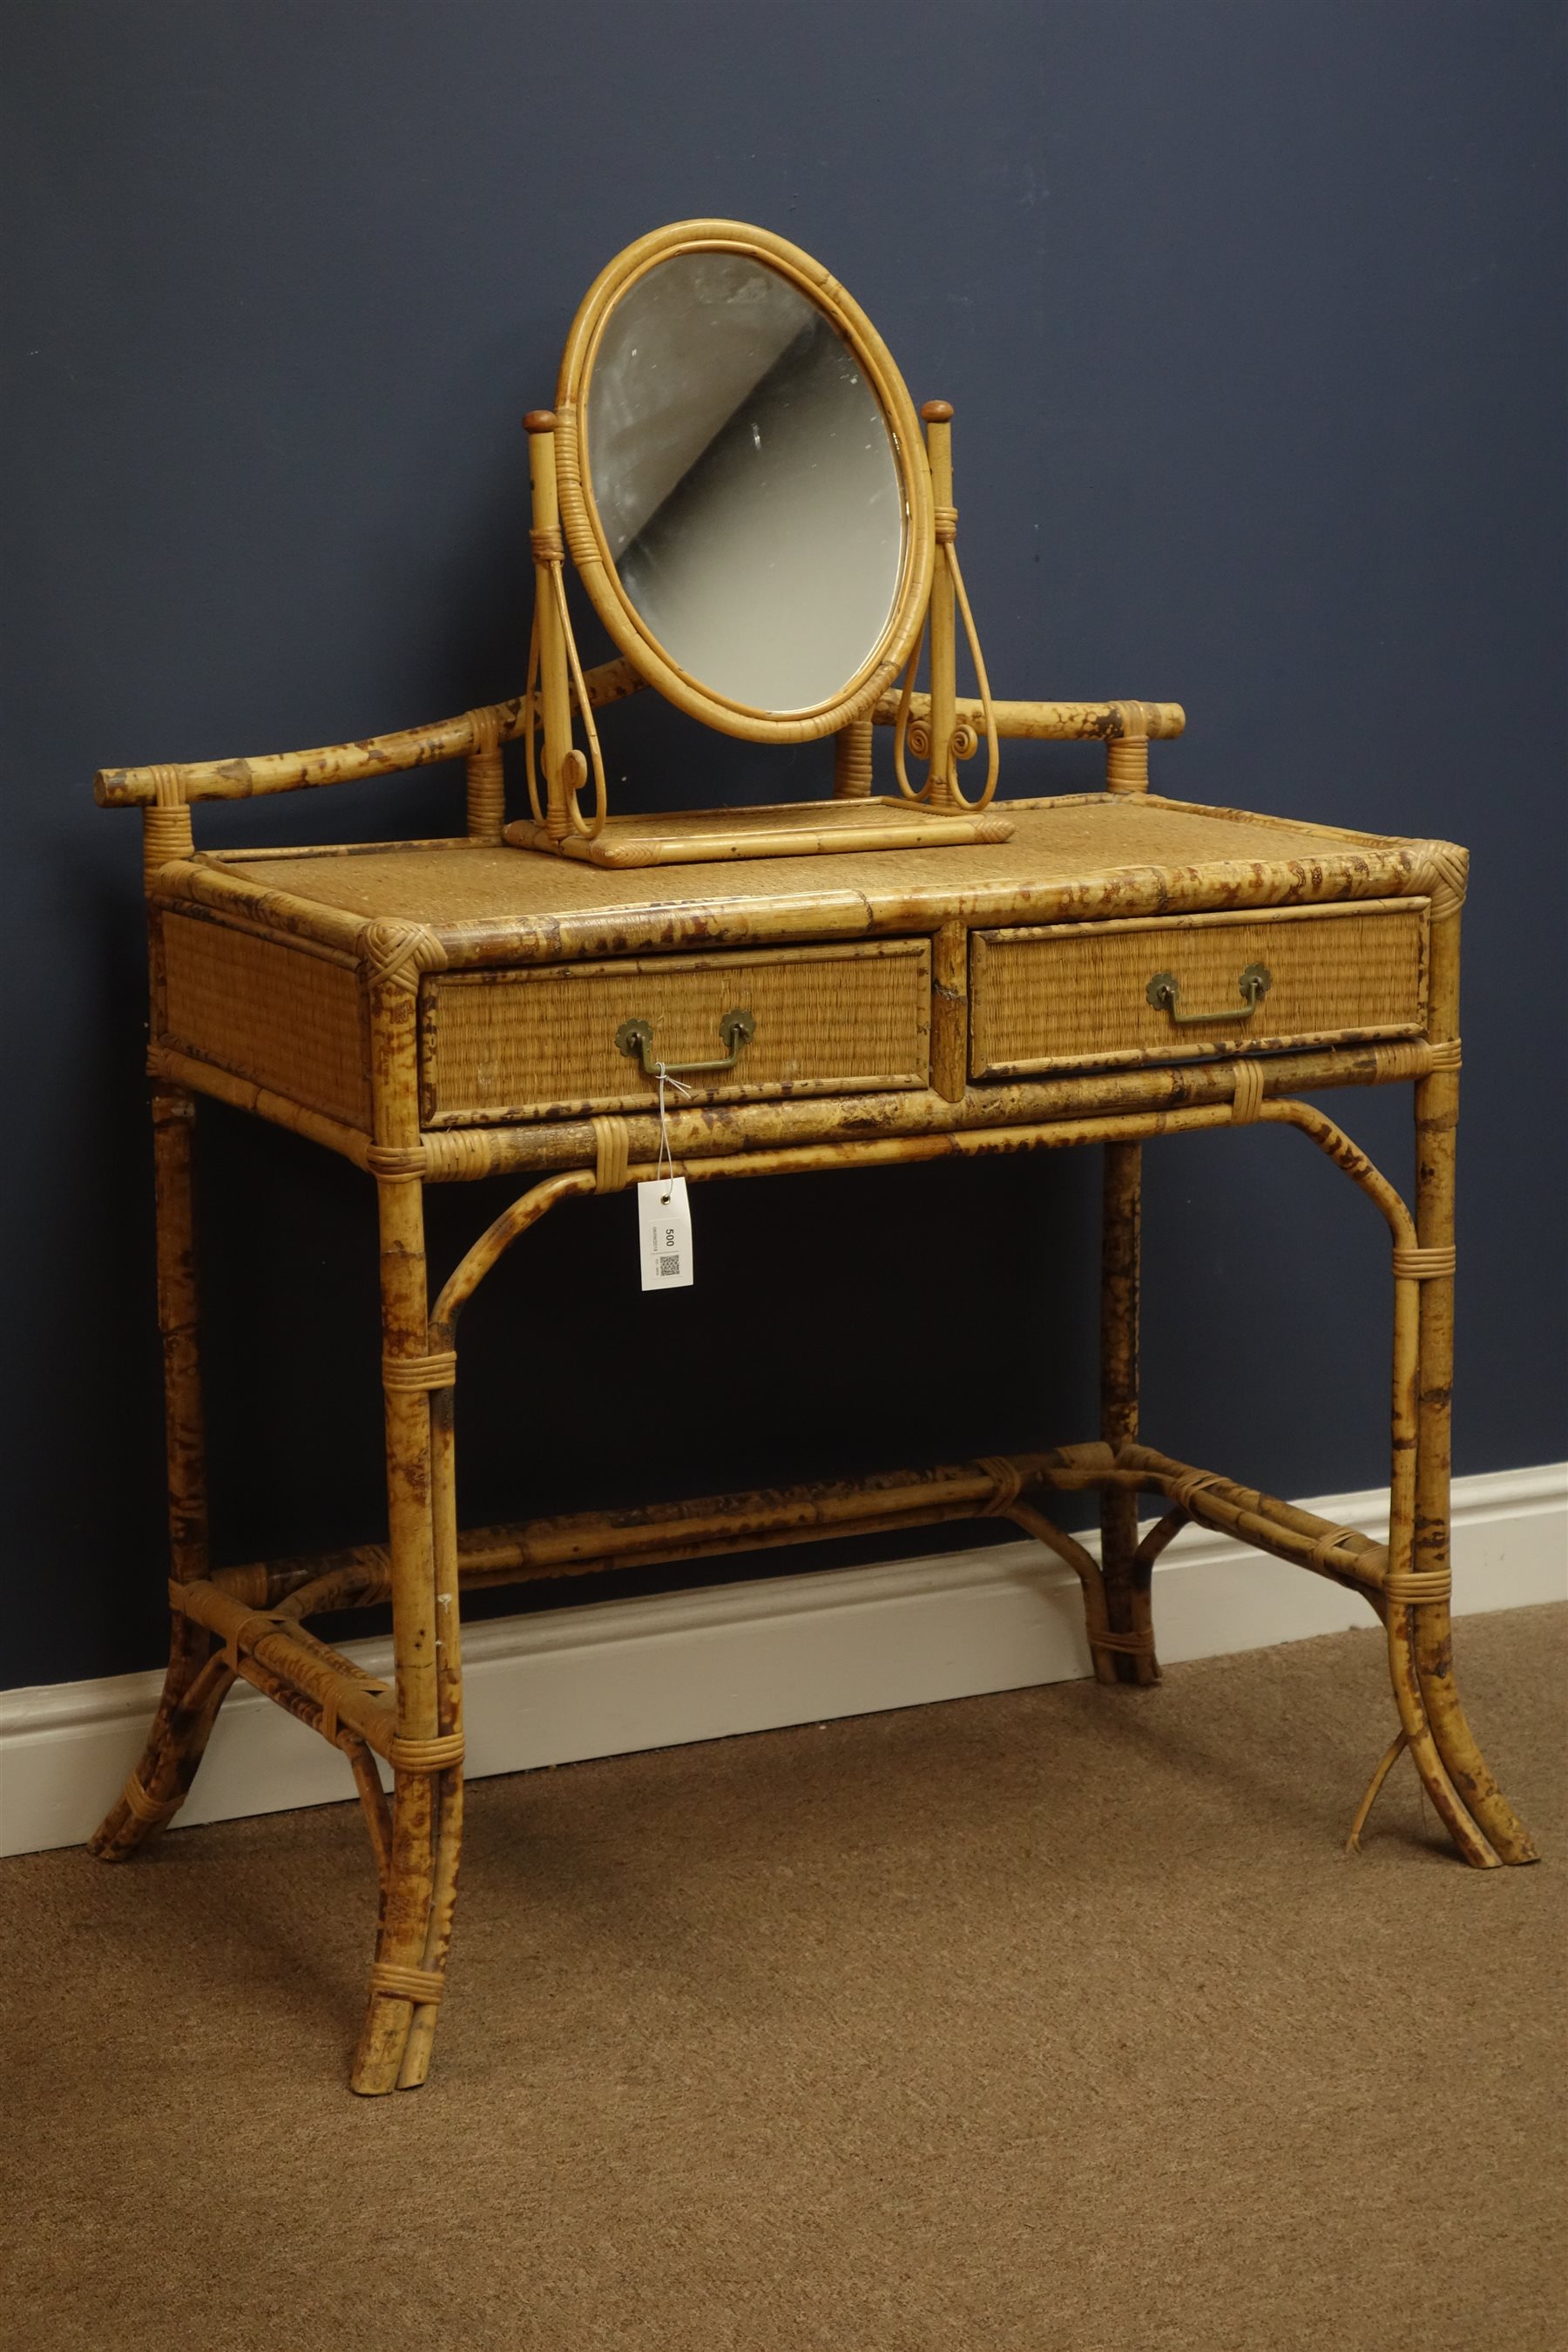 Bamboo And Rattan Bedroom Suite Dressing Table With Two Drawers And Mirror W83cm H119cm D46cm Including Mirror And Matching Three Drawer Pedestal Chest W50cm H72cm D46cm Antiques Interiors